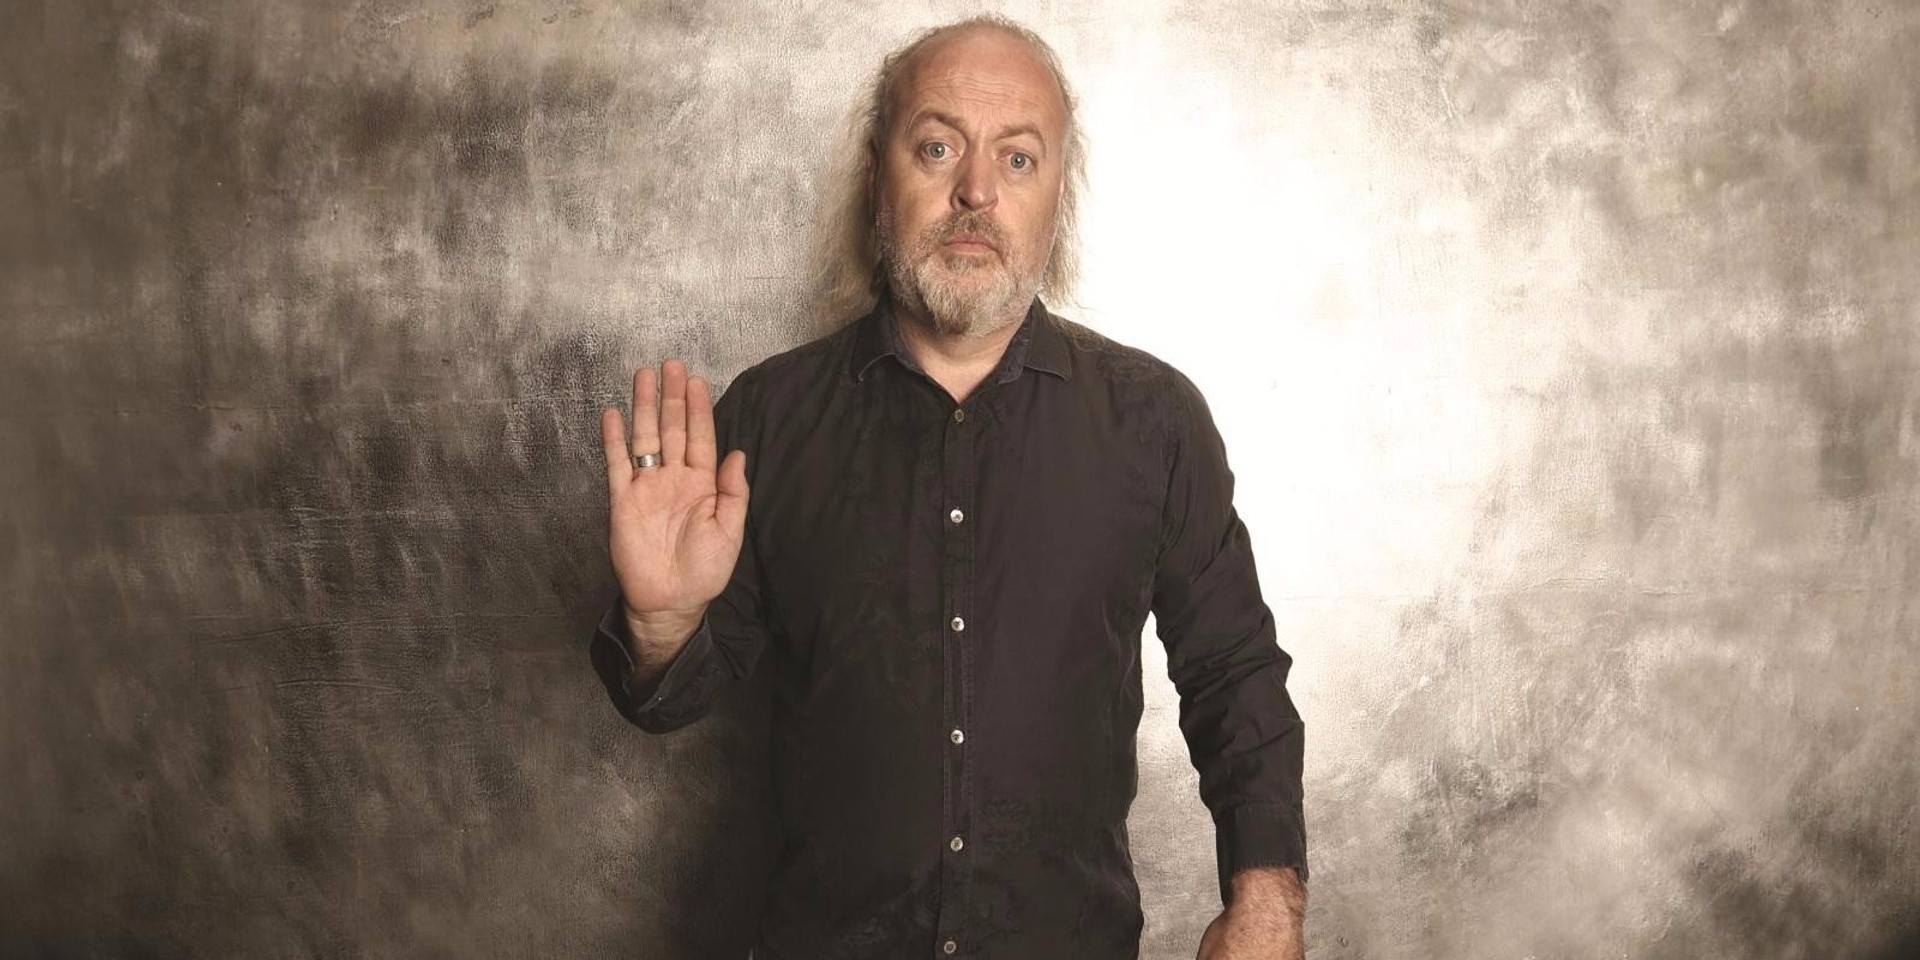 Legendary British comedy musician Bill Bailey to perform in Singapore